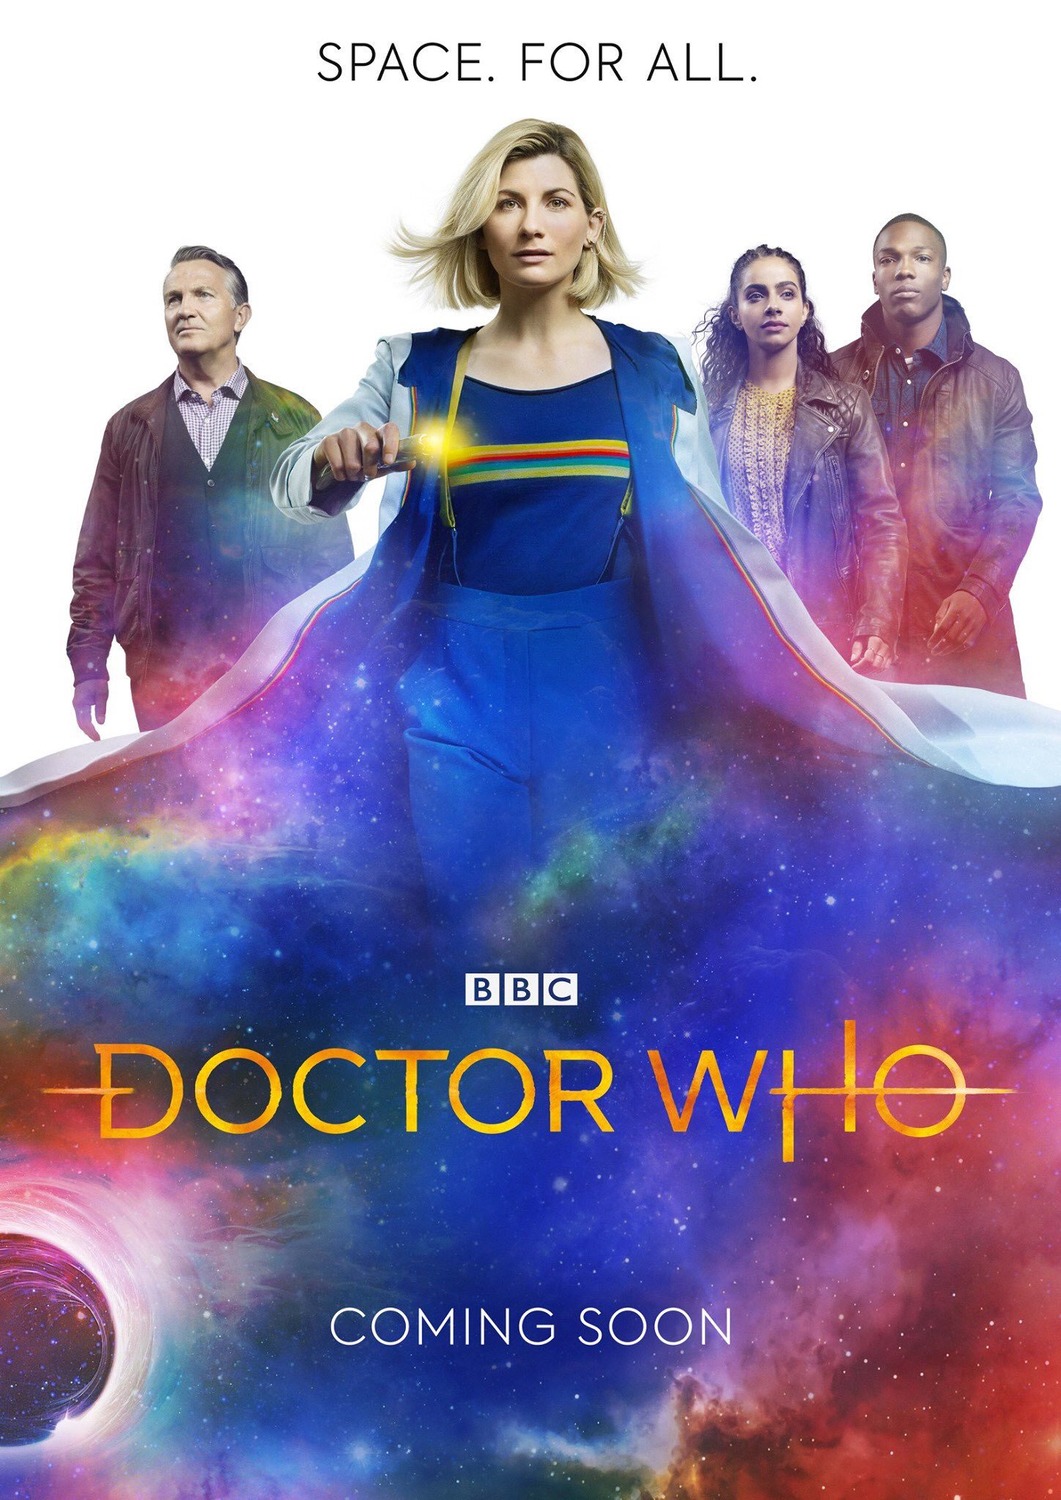 Doctor Who 2005 The Ultimate Companion 720p BluRay x264-BTN